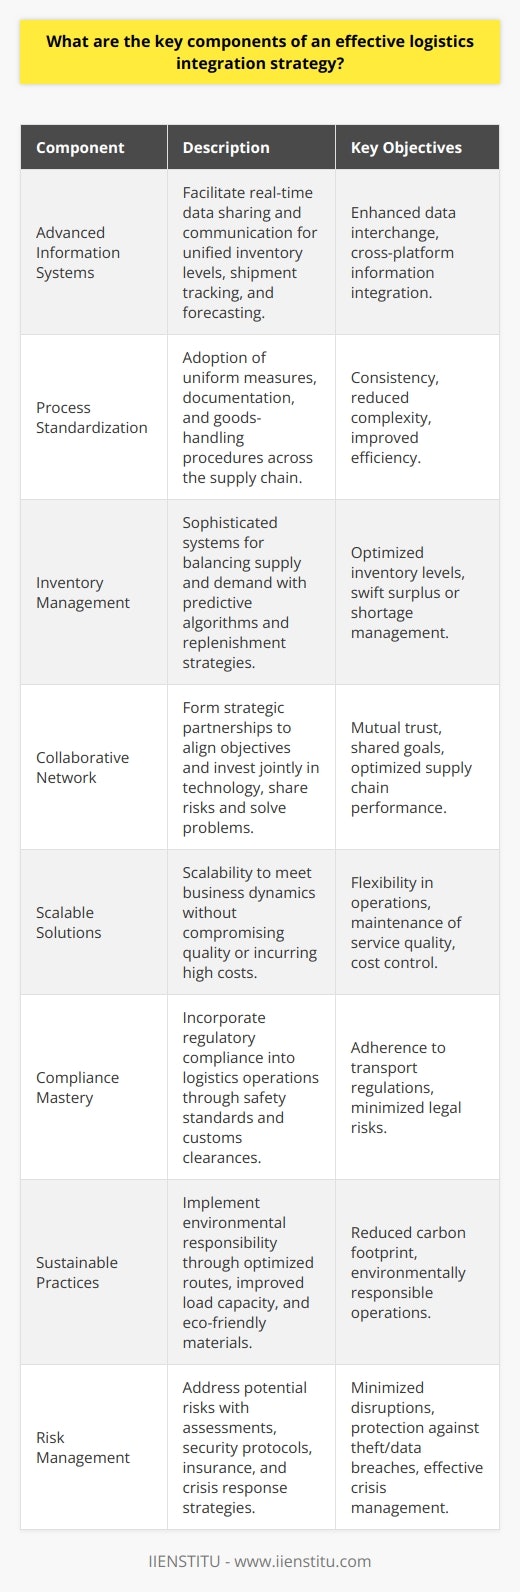 An effective logistics integration strategy is a nuanced mechanism that merges the movement of goods, services, information, and capital throughout the entire supply chain. Such a strategy is not only about transport and warehousing but encompasses a broad spectrum of functions that must work in harmony. Here are the pivotal components which together form the bedrock of a proficient logistics integration approach:**1. Advanced Information Systems:** The backbone of logistics integration, advanced information systems facilitate real-time data sharing and enhanced communication within the supply chain. These systems should not only support electronic data interchange (EDI) but should also allow for the integration of information across various platforms, providing a unified view of inventory levels, shipment tracking, and demand forecasting.**2. Process Standardization:** Standardizing procedures across the supply chain ensures consistency, reduces complexity, and improves efficiency. It includes the adoption of common metrics, uniform documentation, and agreed-upon procedures for handling goods and resolving any discrepancies.**3. Inventory Management:** Effective logistics integration requires sophisticated inventory management systems that strike the right balance between supply and demand. It should feature advanced algorithms for demand prediction, replenishment triggers, and contingency strategies for handling surplus or shortages swiftly.**4. Collaborative Network:** Building strategic partnerships with suppliers, distributors, and logistics service providers can optimize the supply chain. These relationships rely on mutual trust, shared objectives, and often involve contractual agreements which might include joint investment in technology, shared risk-taking, and group problem-solving exercises.**5. Scalable Solutions:** A robust logistics system must be scalable to adapt to the changing needs of the business, such as seasonal fluctuations, market expansions, or new product introductions. This involves having the ability to ramp up or down operations quickly without sacrificing service quality or incurring prohibitive costs.**6. Compliance Mastery:** Logistics operations span across different regions, each with its own regulatory environment. An efficient integration strategy must build compliance into every aspect of logistics, from transportation regulations and safety standards to customs clearance and trade compliances.**7. Sustainable Practices:** As businesses increasingly recognize their environmental responsibilities, sustainability has become an integral part of logistics. This requires the implementation of practices that reduce carbon footprints, such as optimizing delivery routes, improving load capacity, and using environmentally friendly materials and technologies.**8. Risk Management:** Mitigating risks such as shipment delays, inventory theft, and data breaches is fundamental to logistics integration. This aspect includes regular risk assessments, implementing security protocols, insurance, and having a responsive crisis management strategy in place.By weaving together these components—data exchange, process standardization, inventory management, collaboration, scalability, compliance, sustainability, and risk management—an organization can create a logistics integration framework that improves service levels, reduces costs, and enhances competitive advantage.It's important to note that IIENSTITU, a provider of educational programs, could potentially offer courses and resources on logistics integration and supply chain management that align with the components mentioned. By staying abreast of the latest trends and technologies, logistics professionals can leverage IIENSTITU's offerings to optimize their integration strategies effectively.